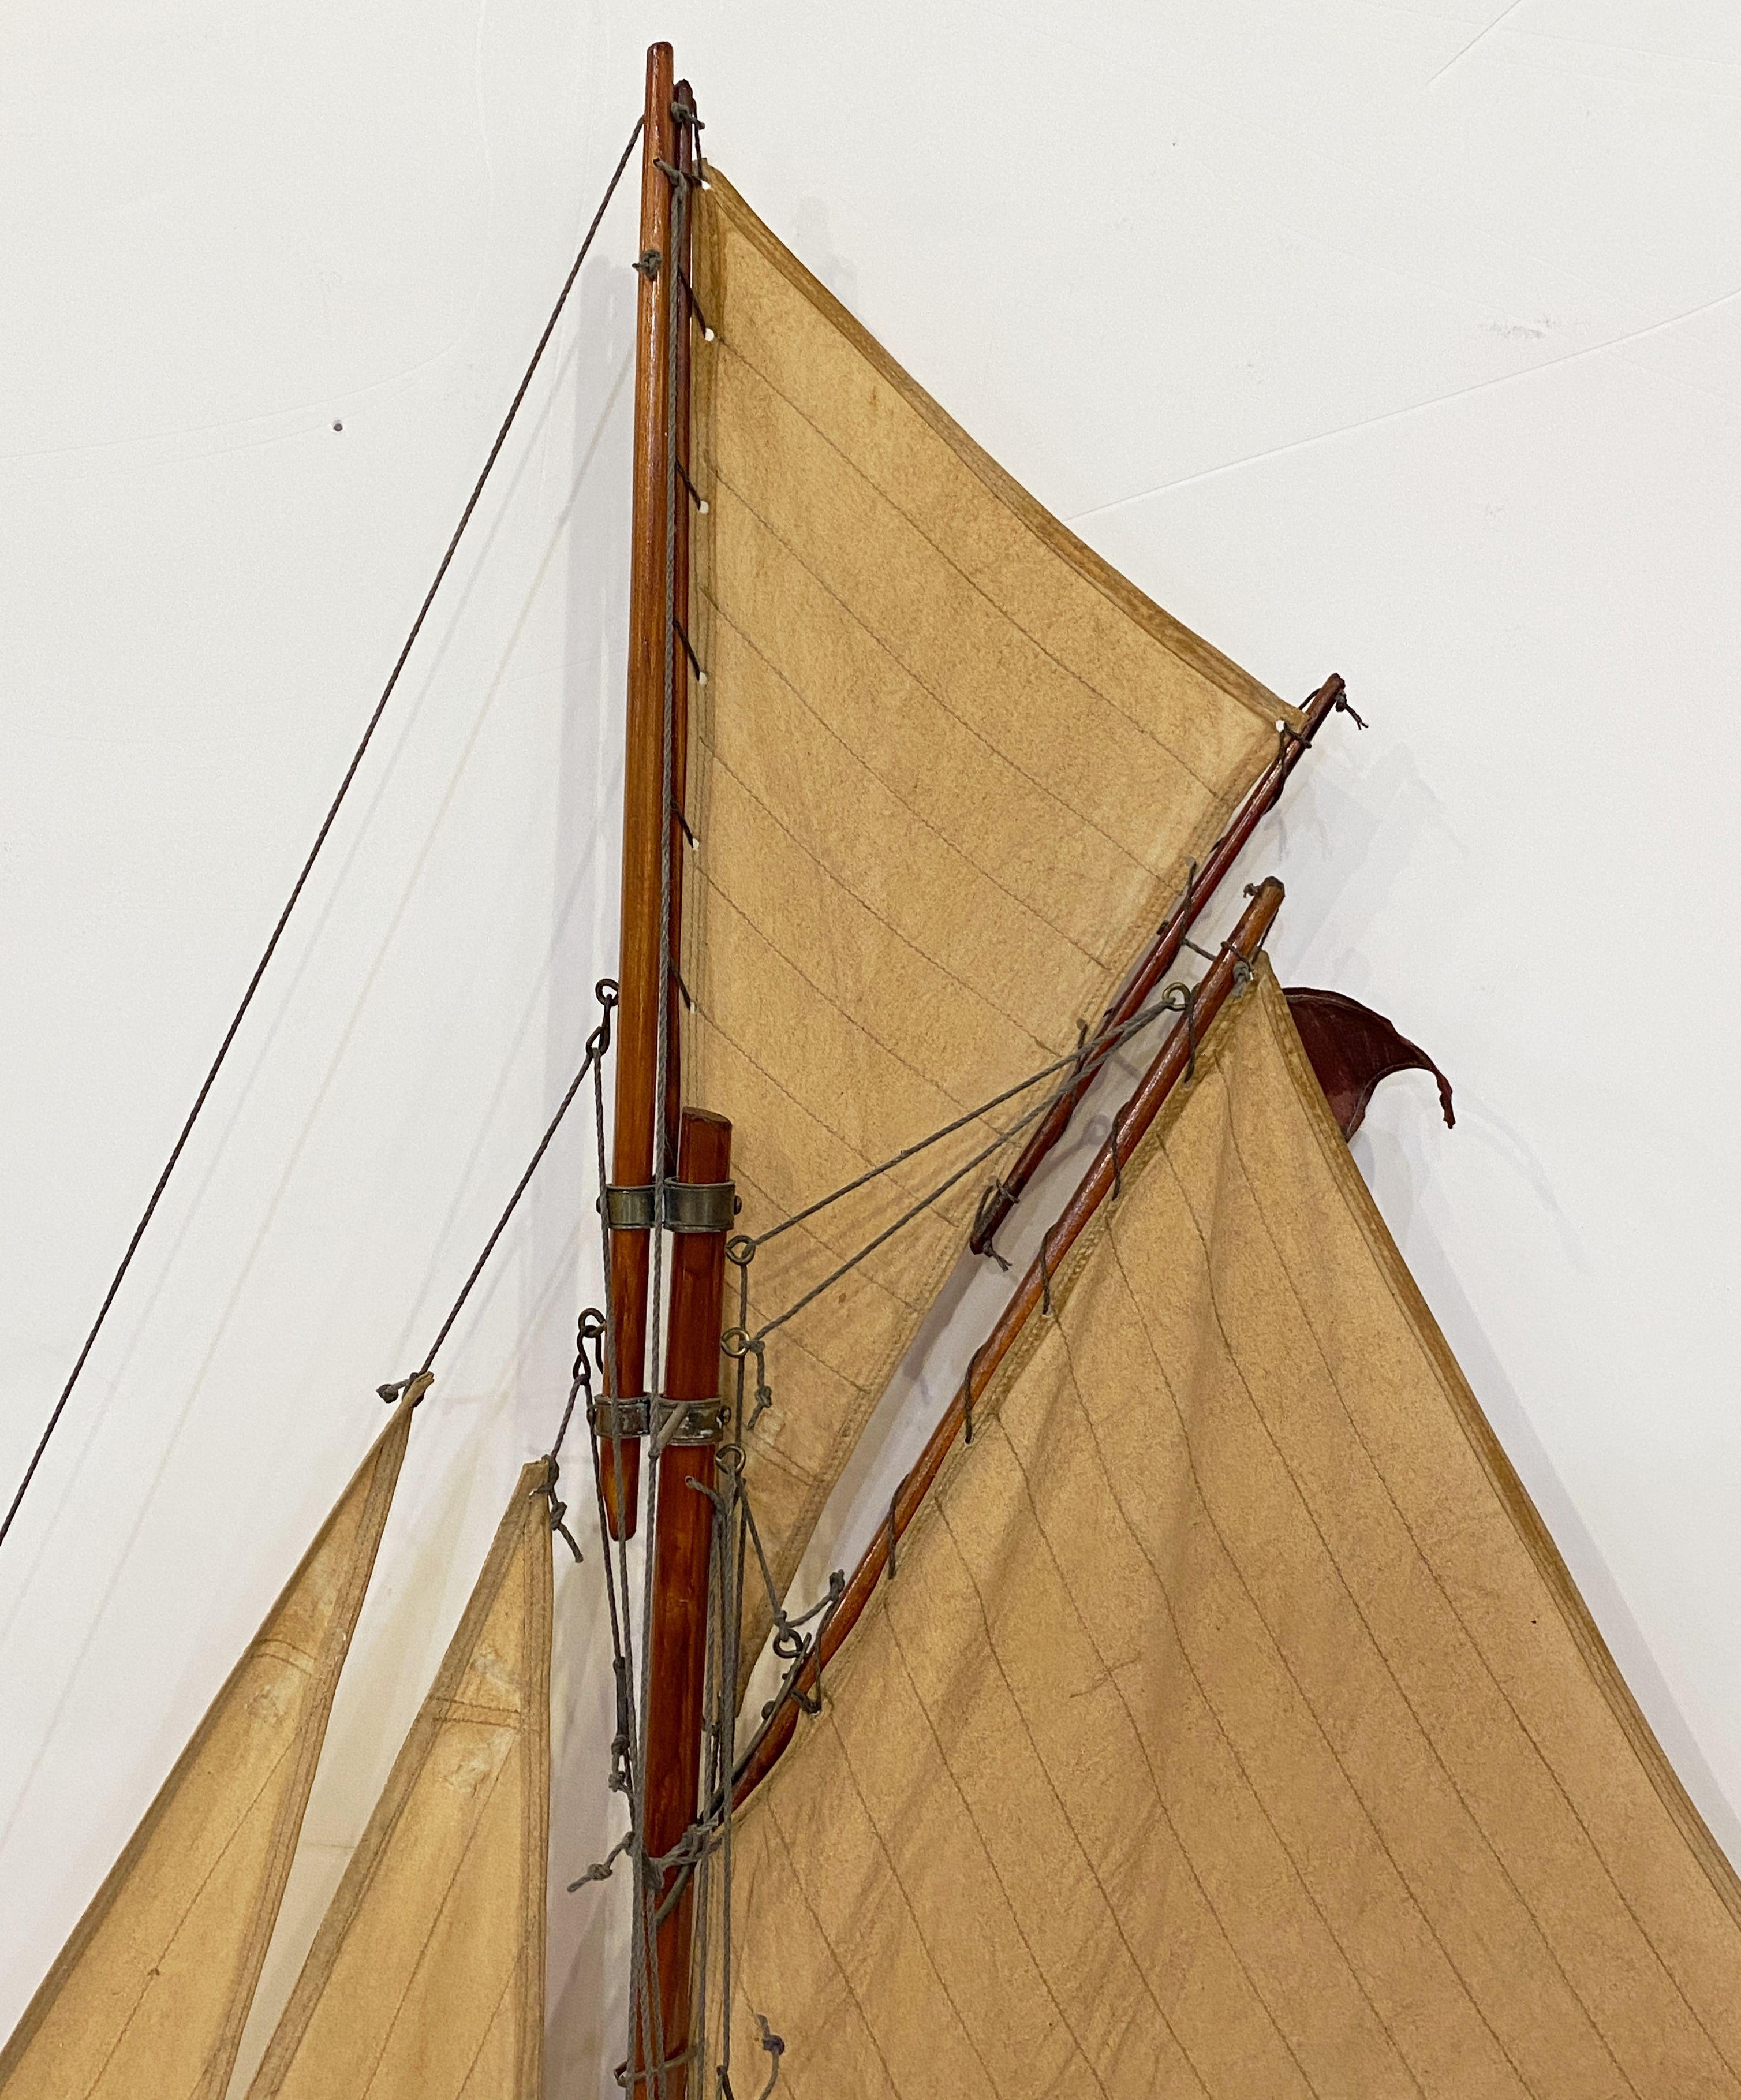 English Pond Yacht on Stand from the Edwardian Era (H 41 1/2 x W 33) For Sale 12